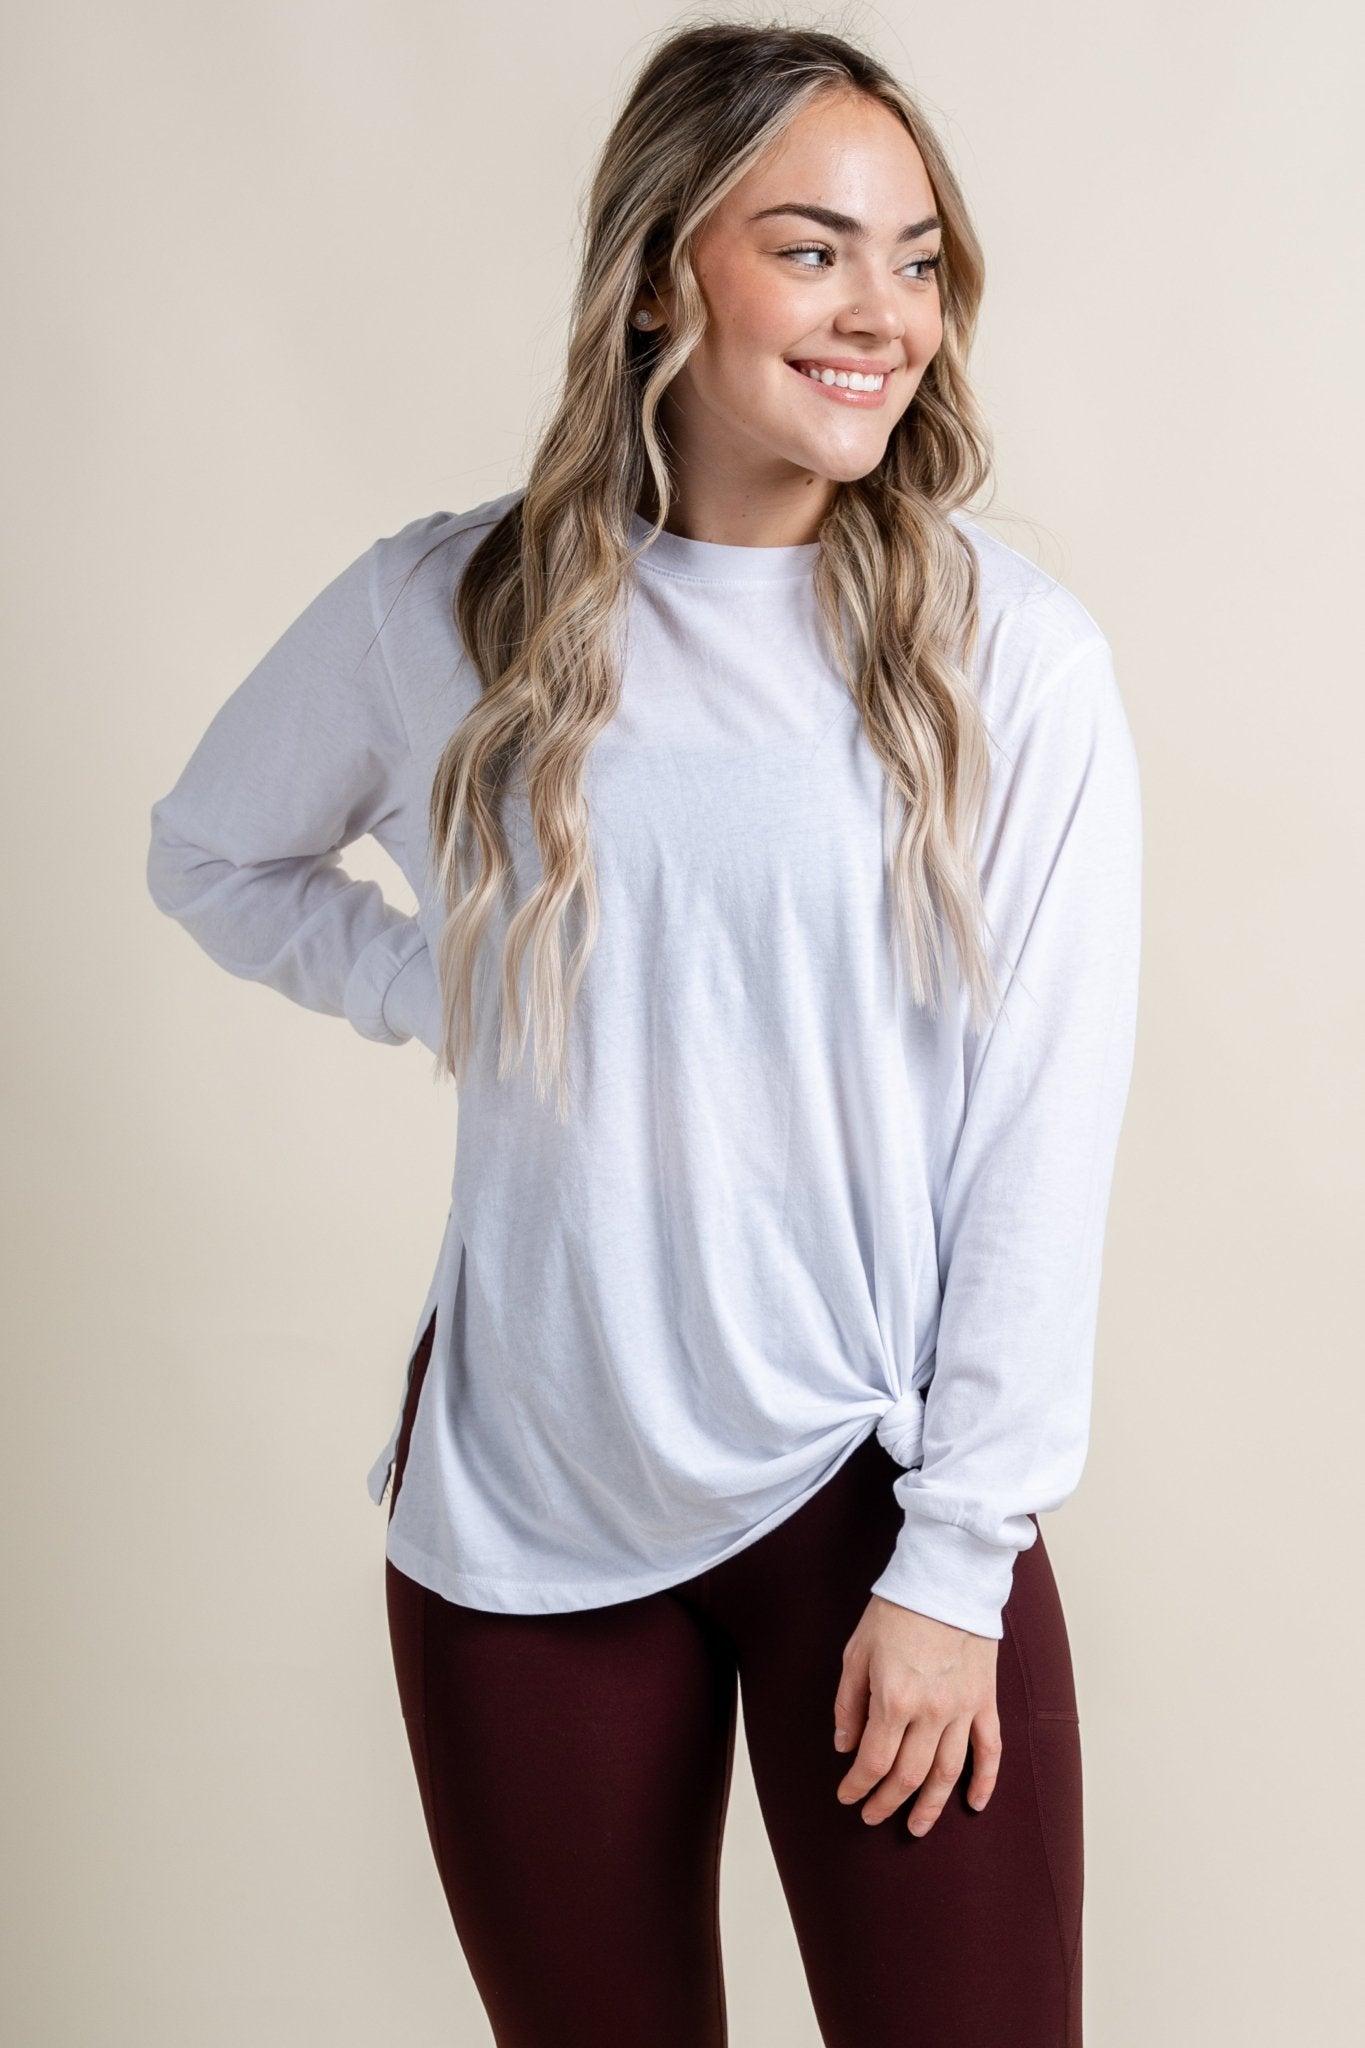 Z Supply cool down long sleeve top white - Z Supply tank top - Z Supply Tops, Dresses, Tanks, Tees, Cardigans, Joggers and Loungewear at Lush Fashion Lounge